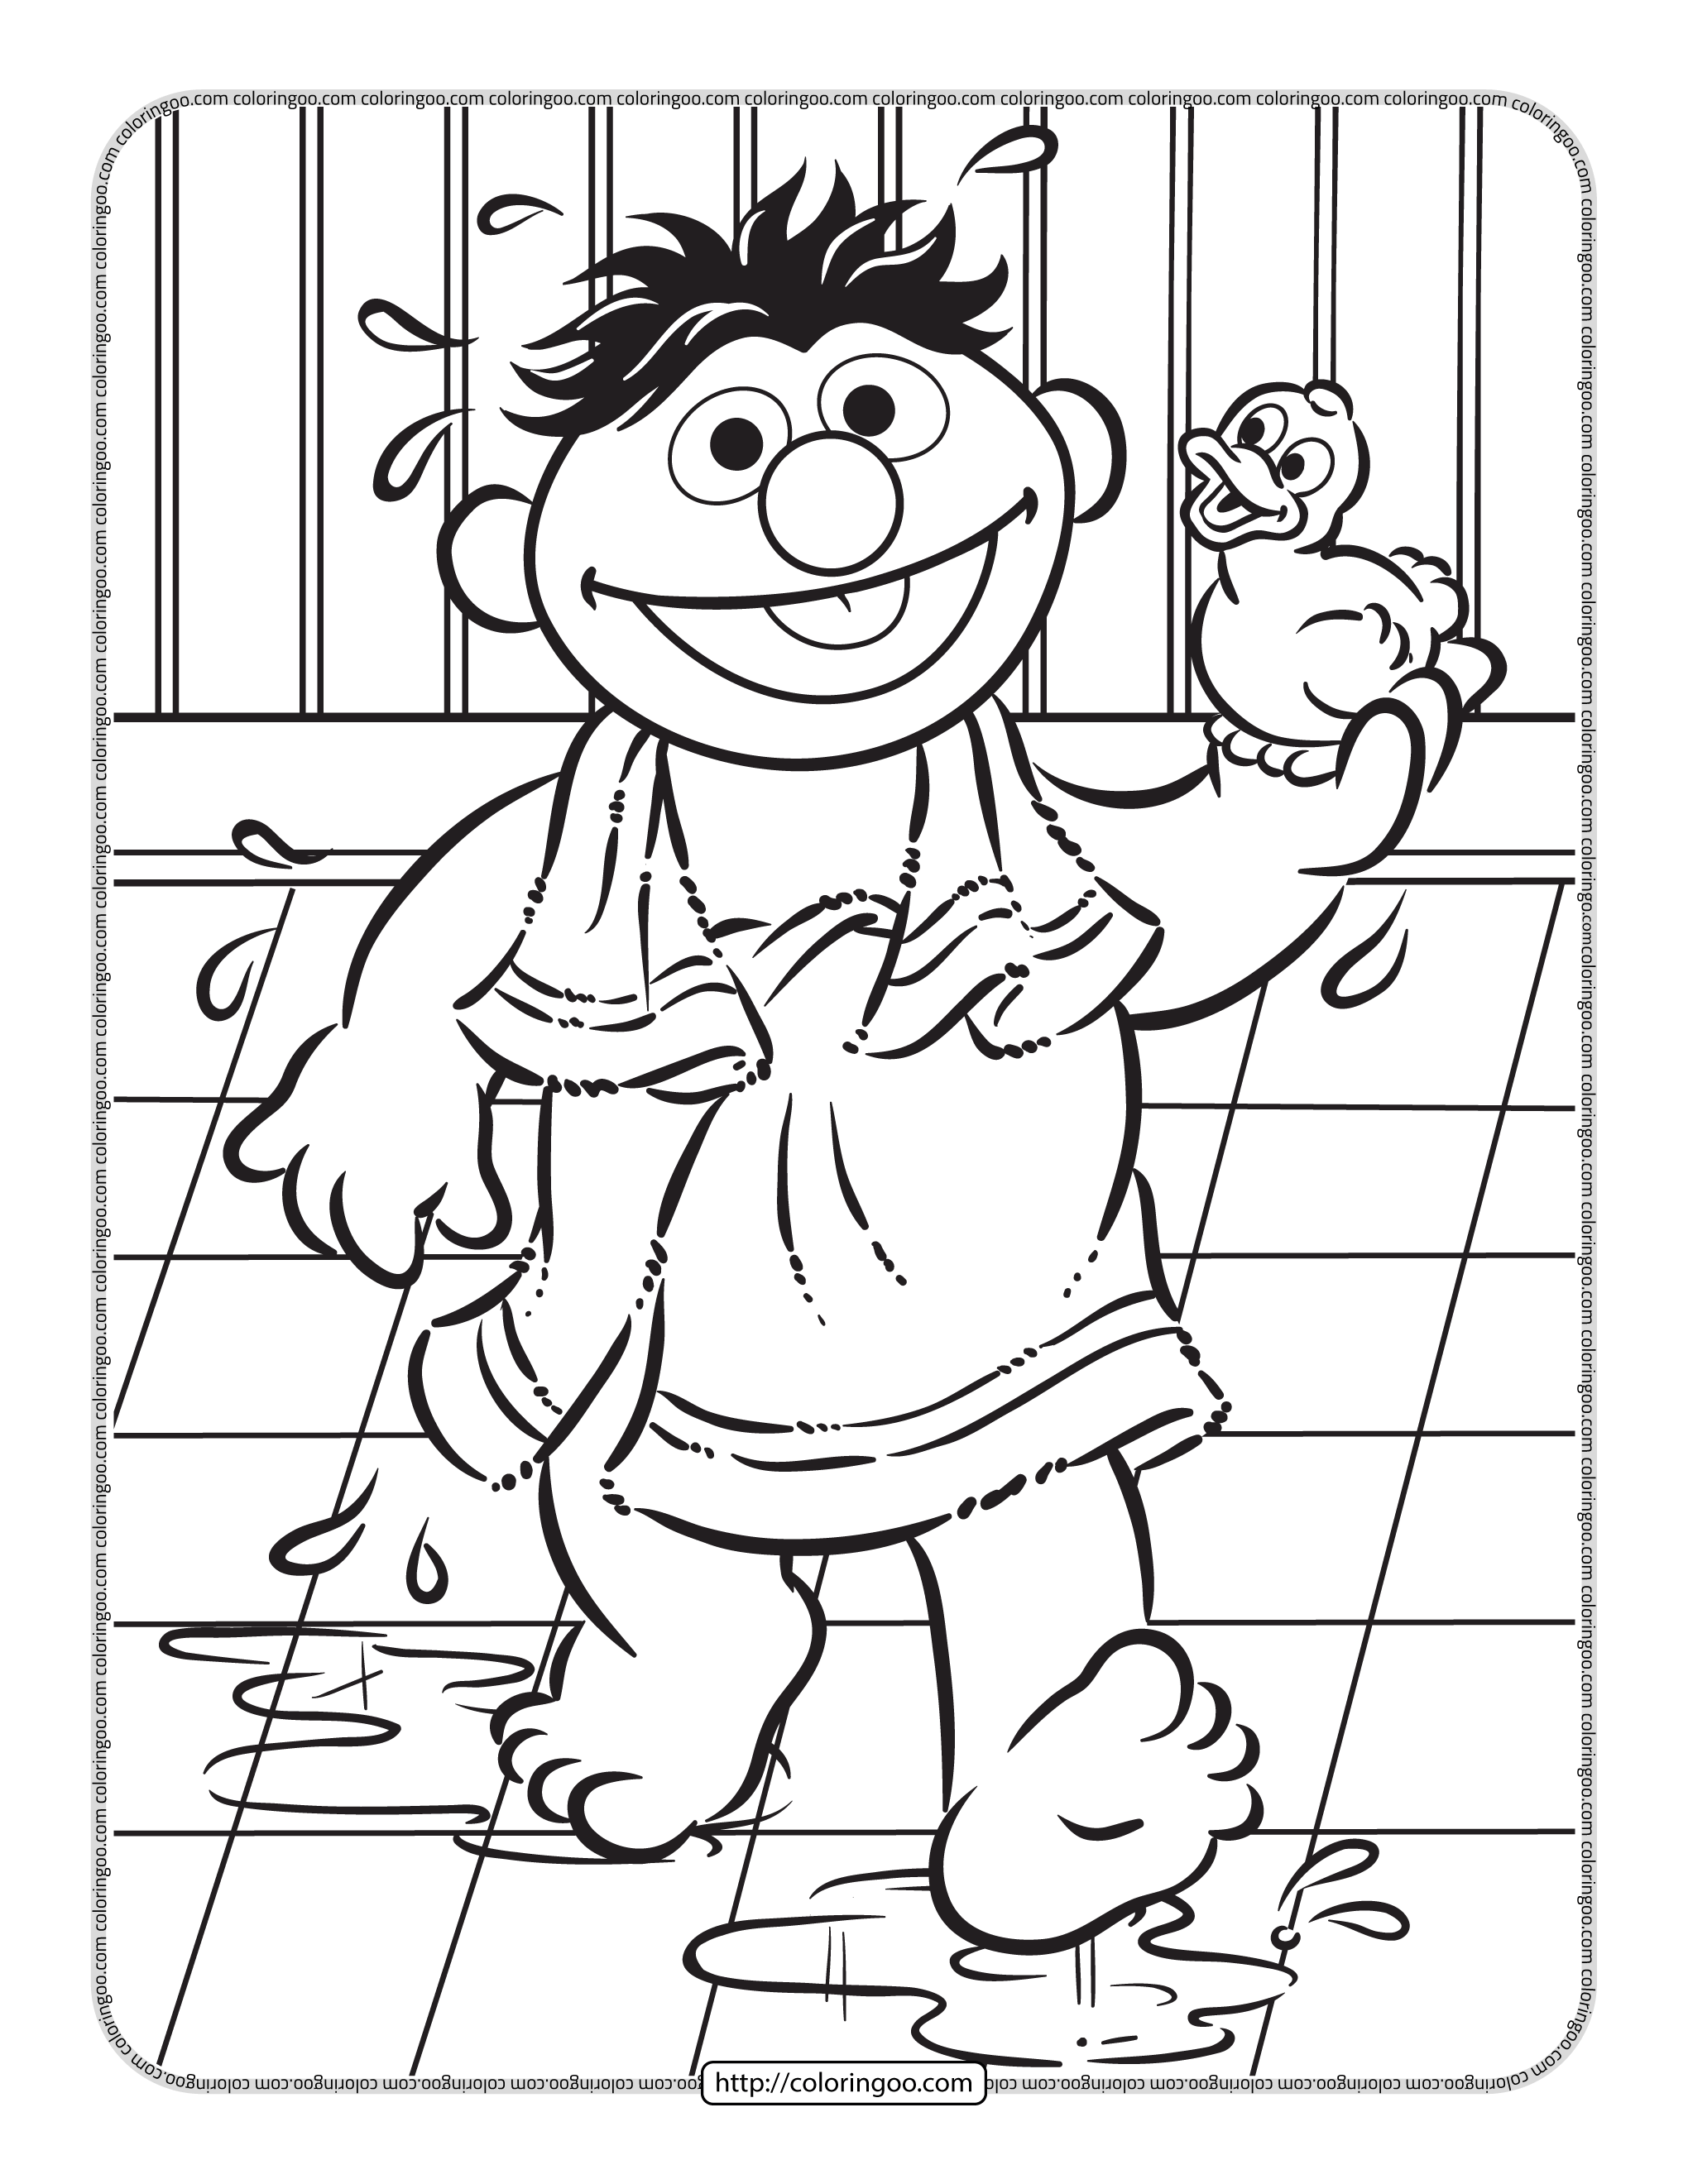 ernie in the bathroom coloring page